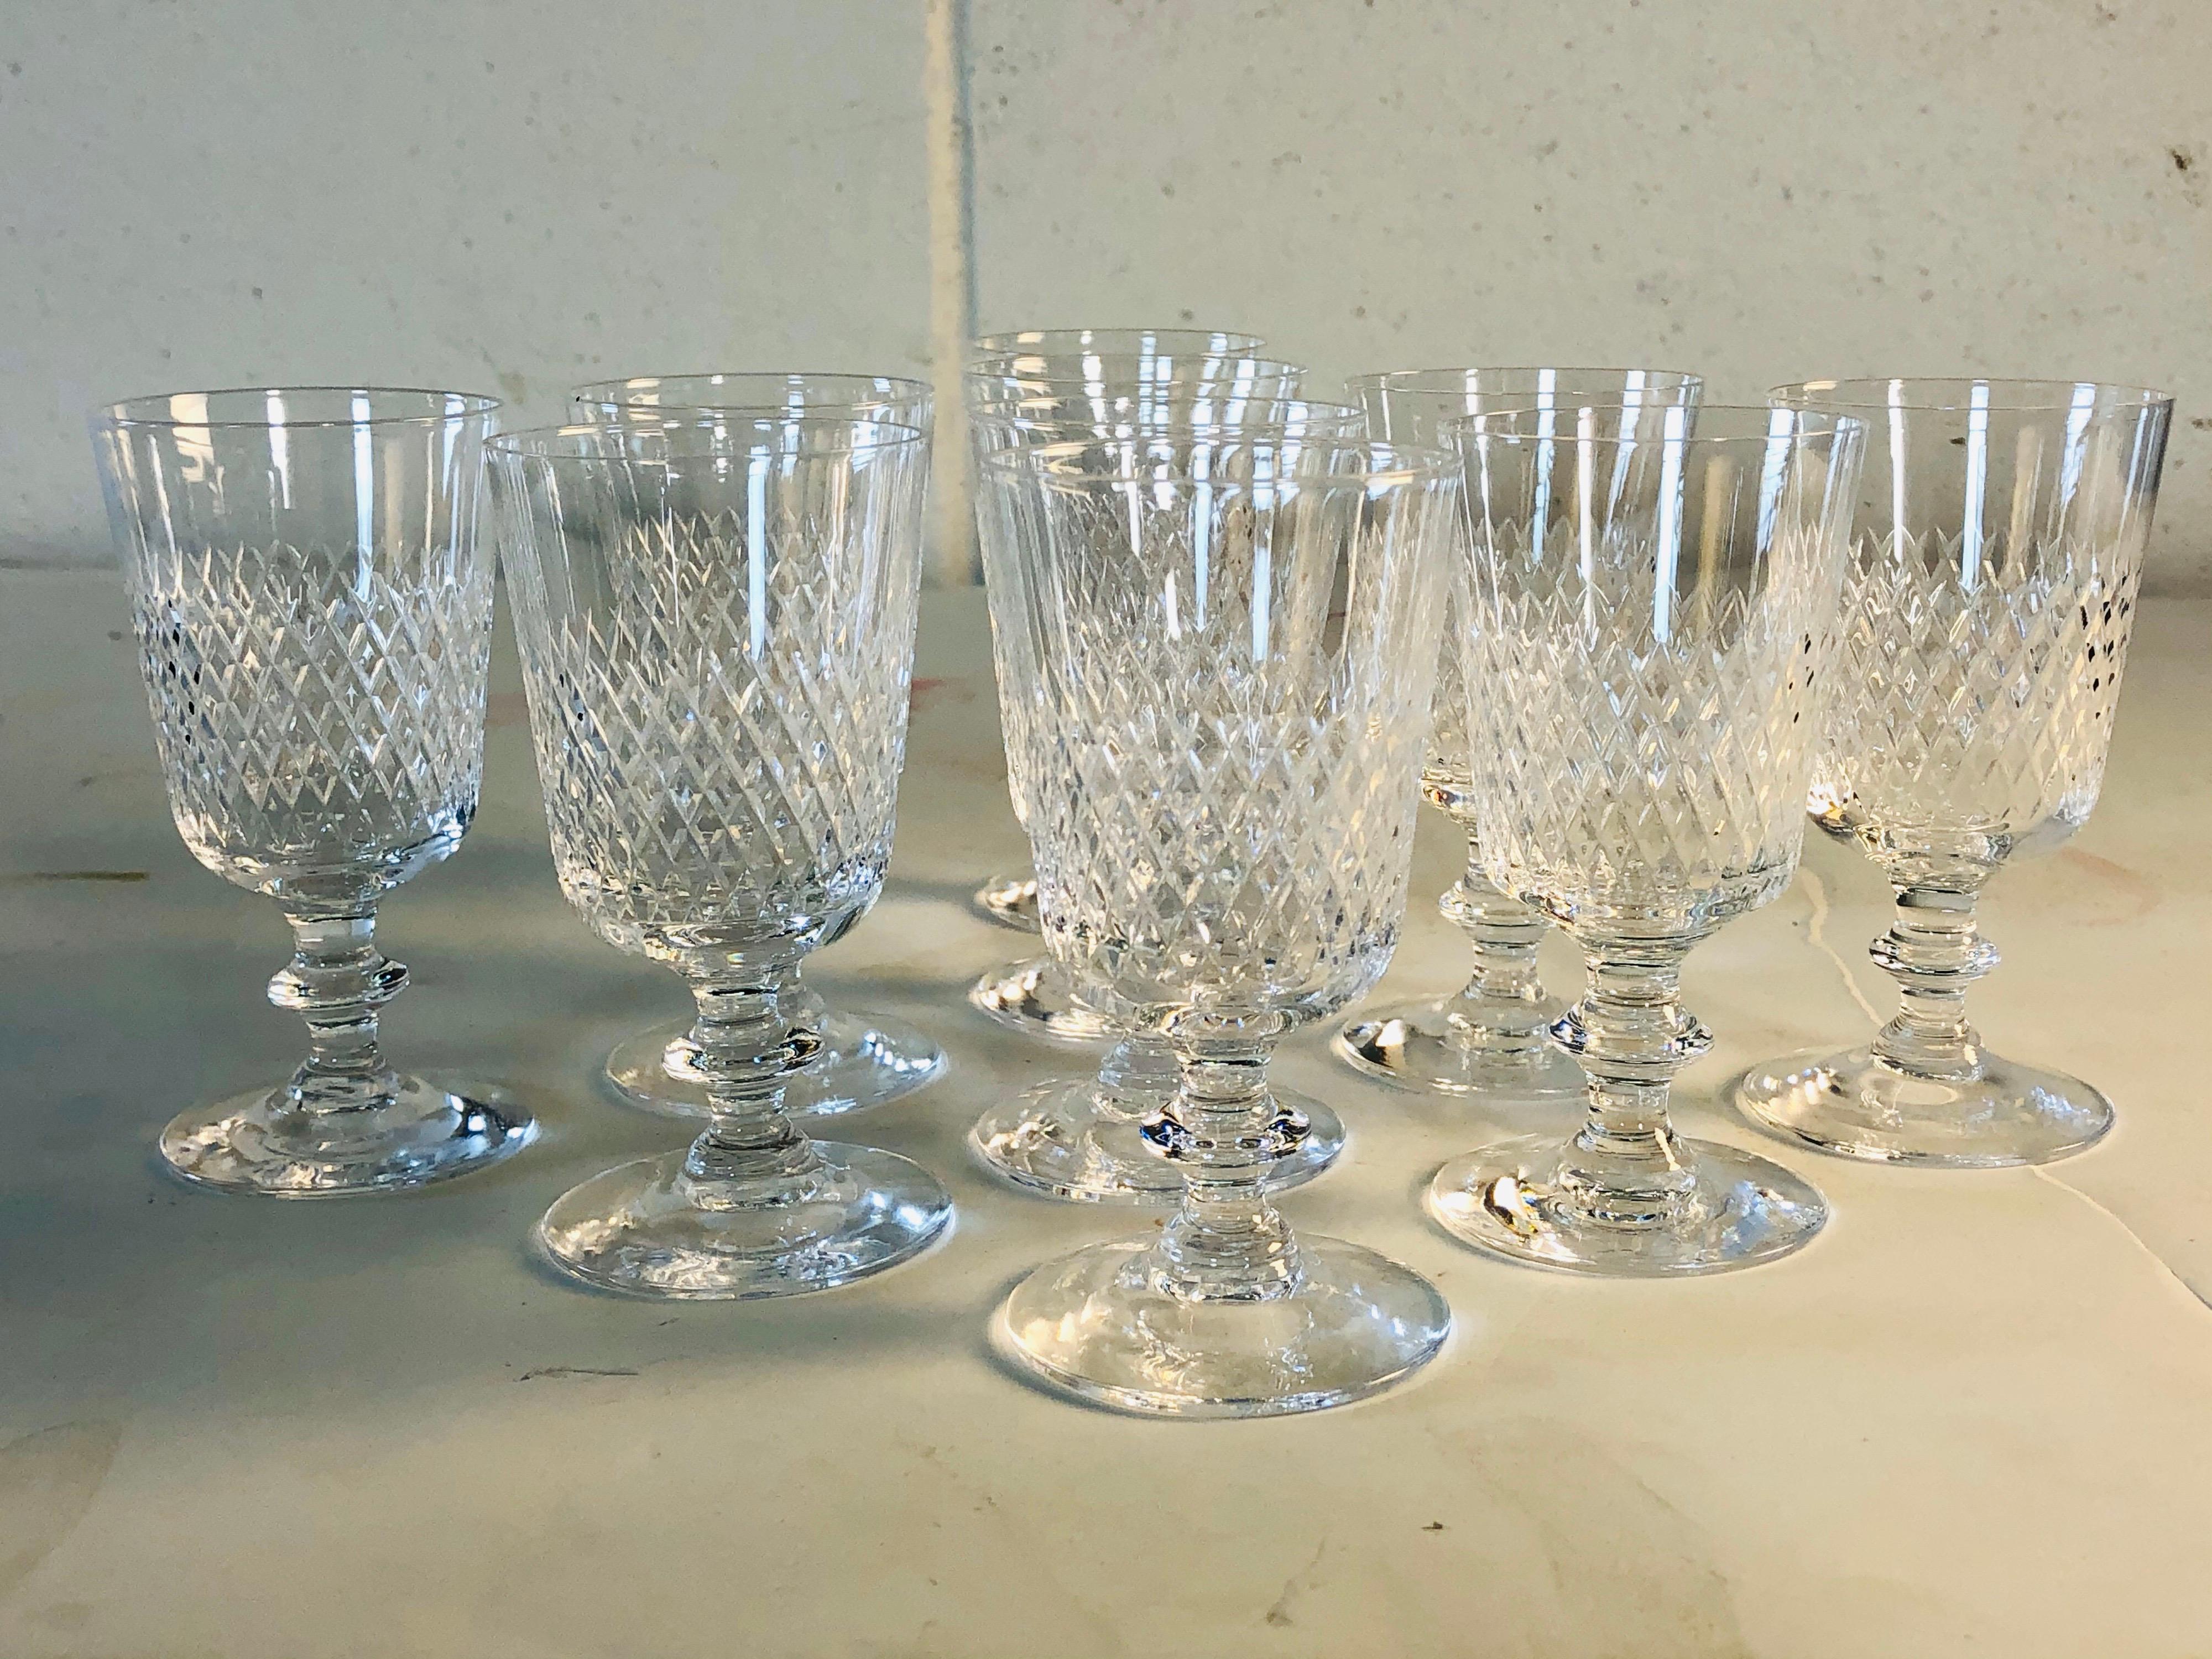 Vintage 1960s wheel-cut glass liquor stems by Kosta Boda, set of 10. Beautifully handcut and polished stems. Signed and etched underneath. Excellent condition, except one stem has a very small rim nick.